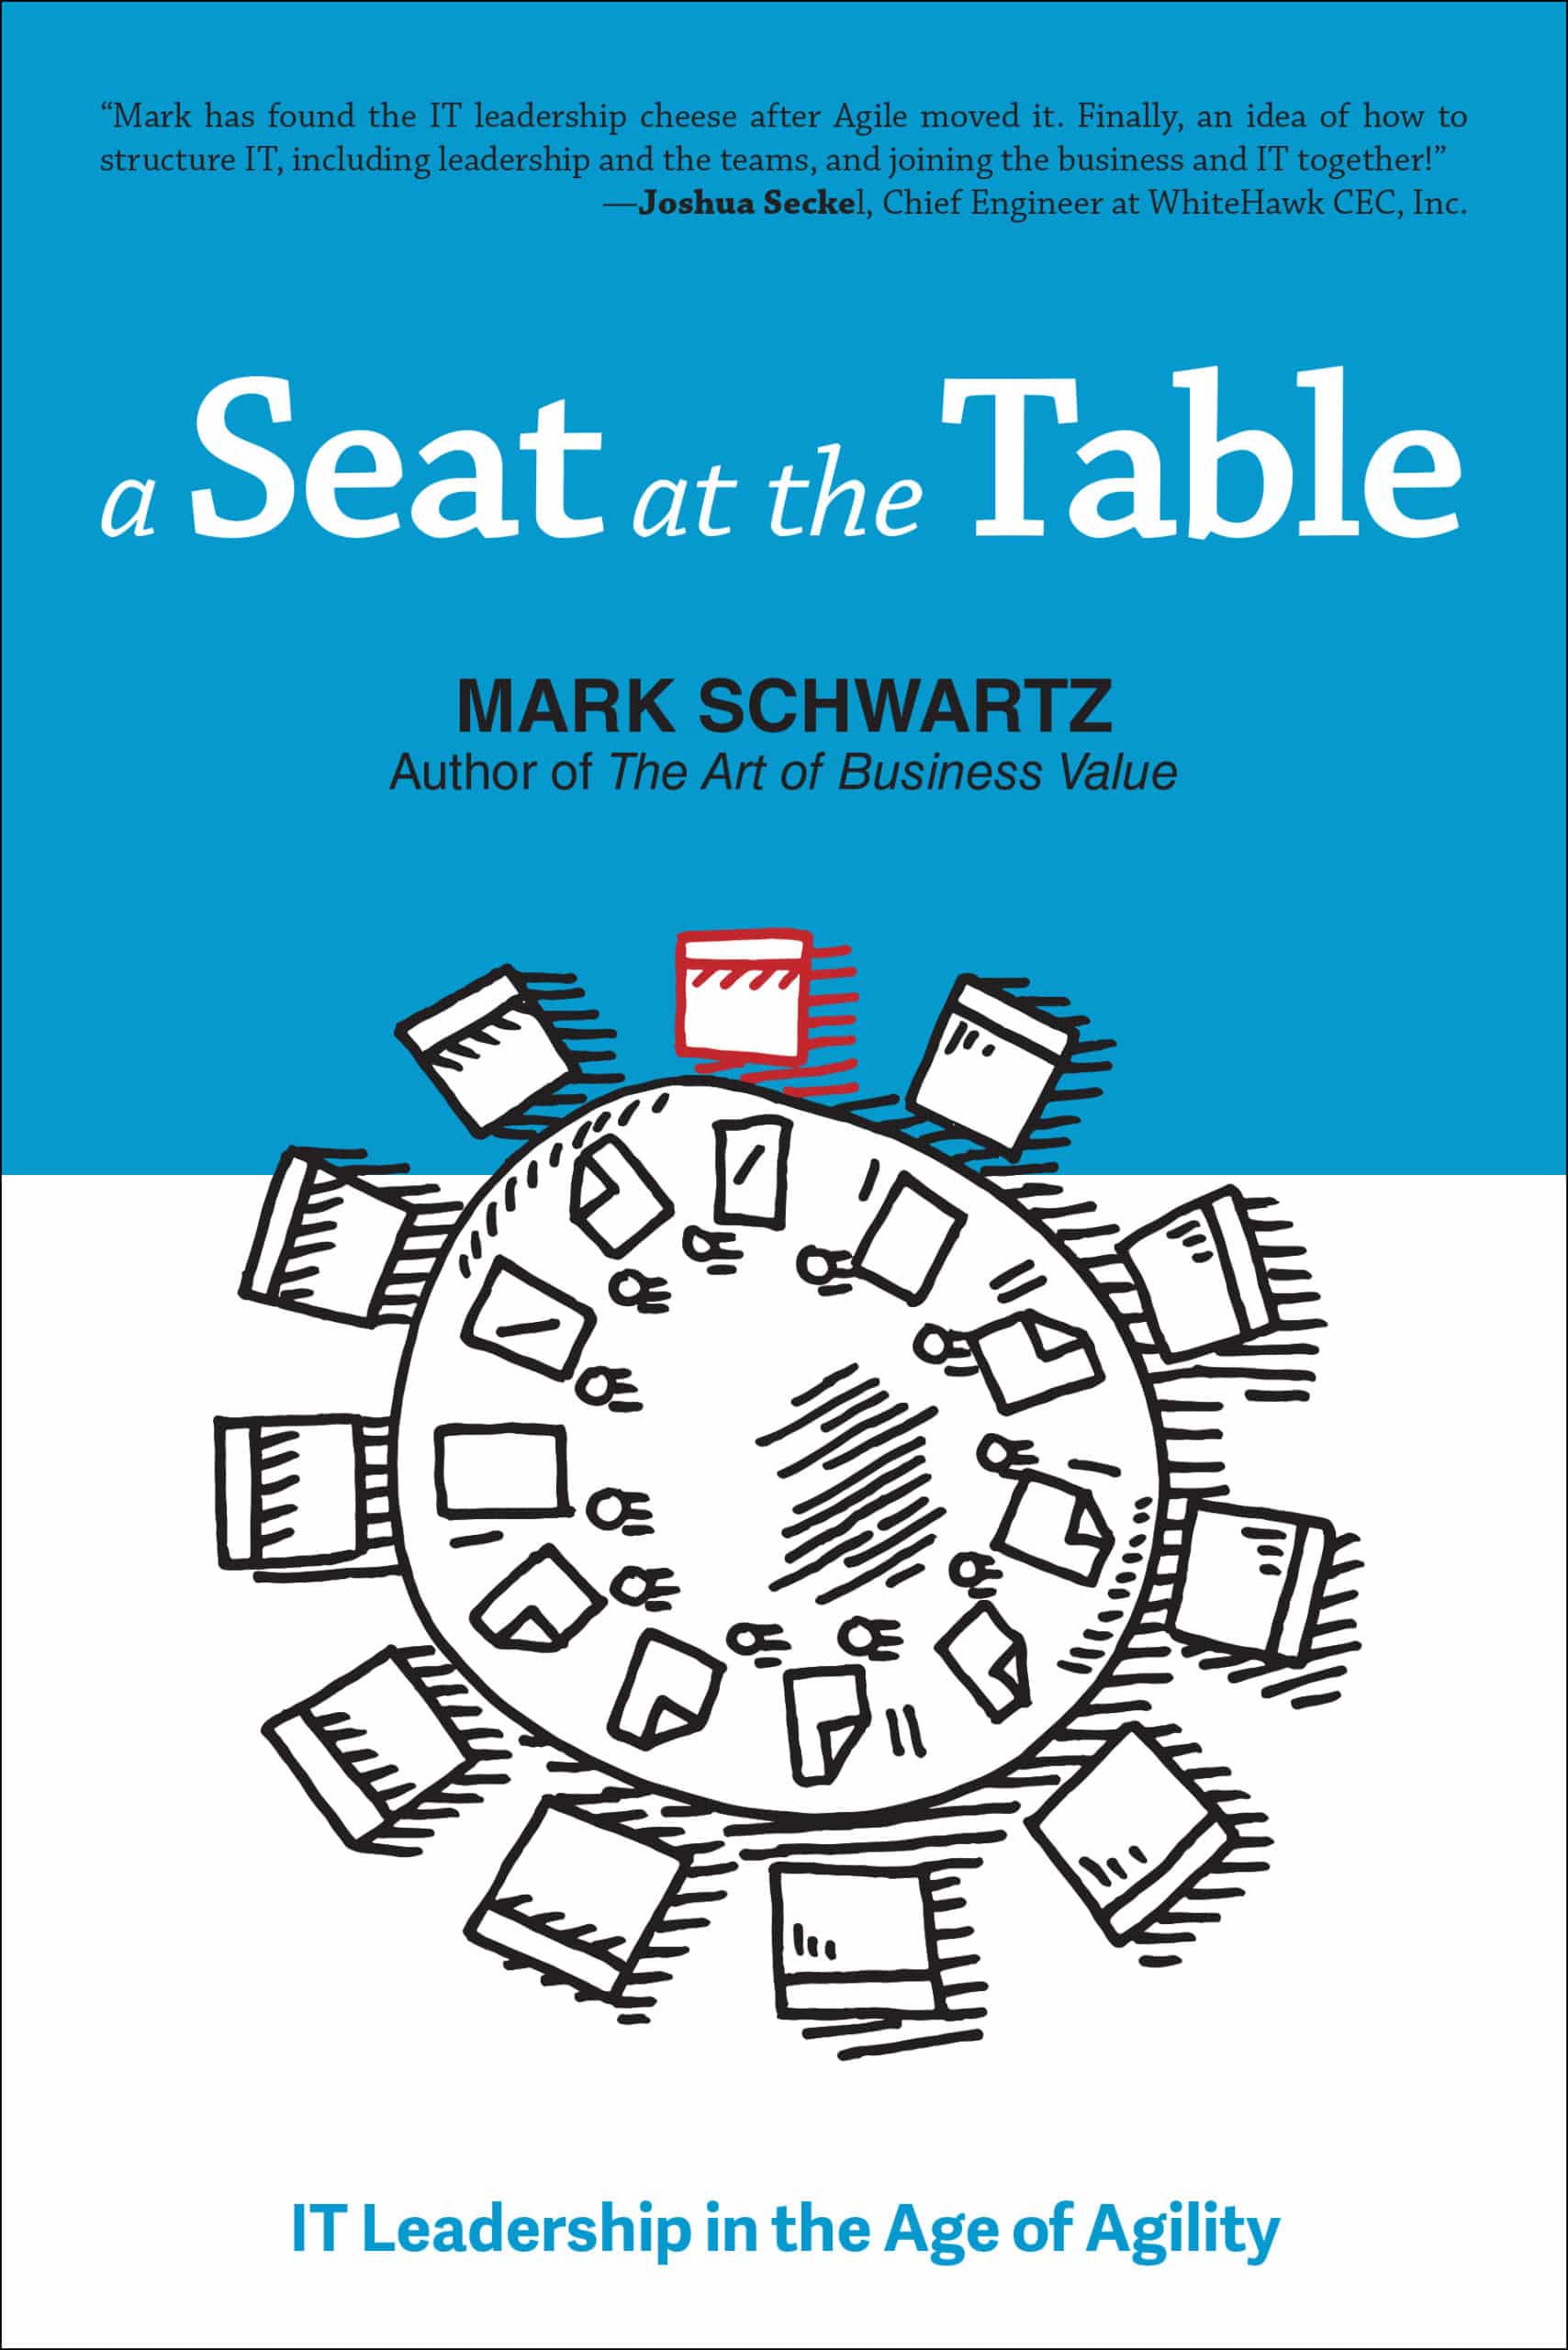 Cover of A Seat at the Table: IT Leadership in the Age of Agility by Mark Schwartz, which includes recommendations on reframing failure and addressing quality in IT.